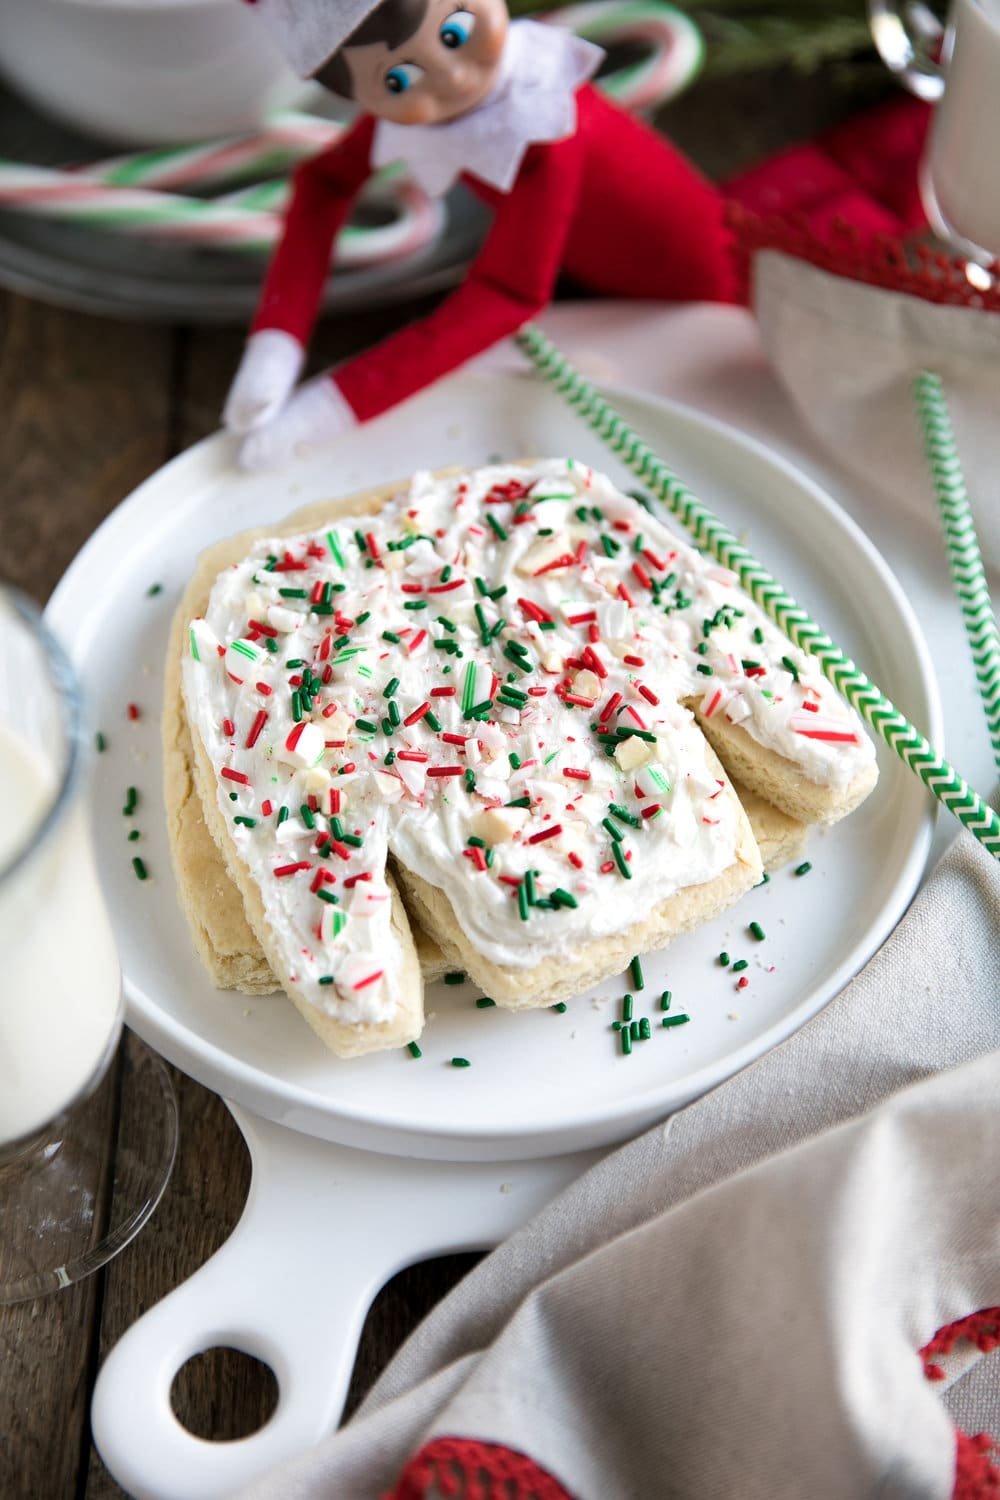 Fun, fast and easy, these Ugly Sweater Sugar Cookie Bar Cutouts are soft, thick and chewy and require no rolling or chilling.